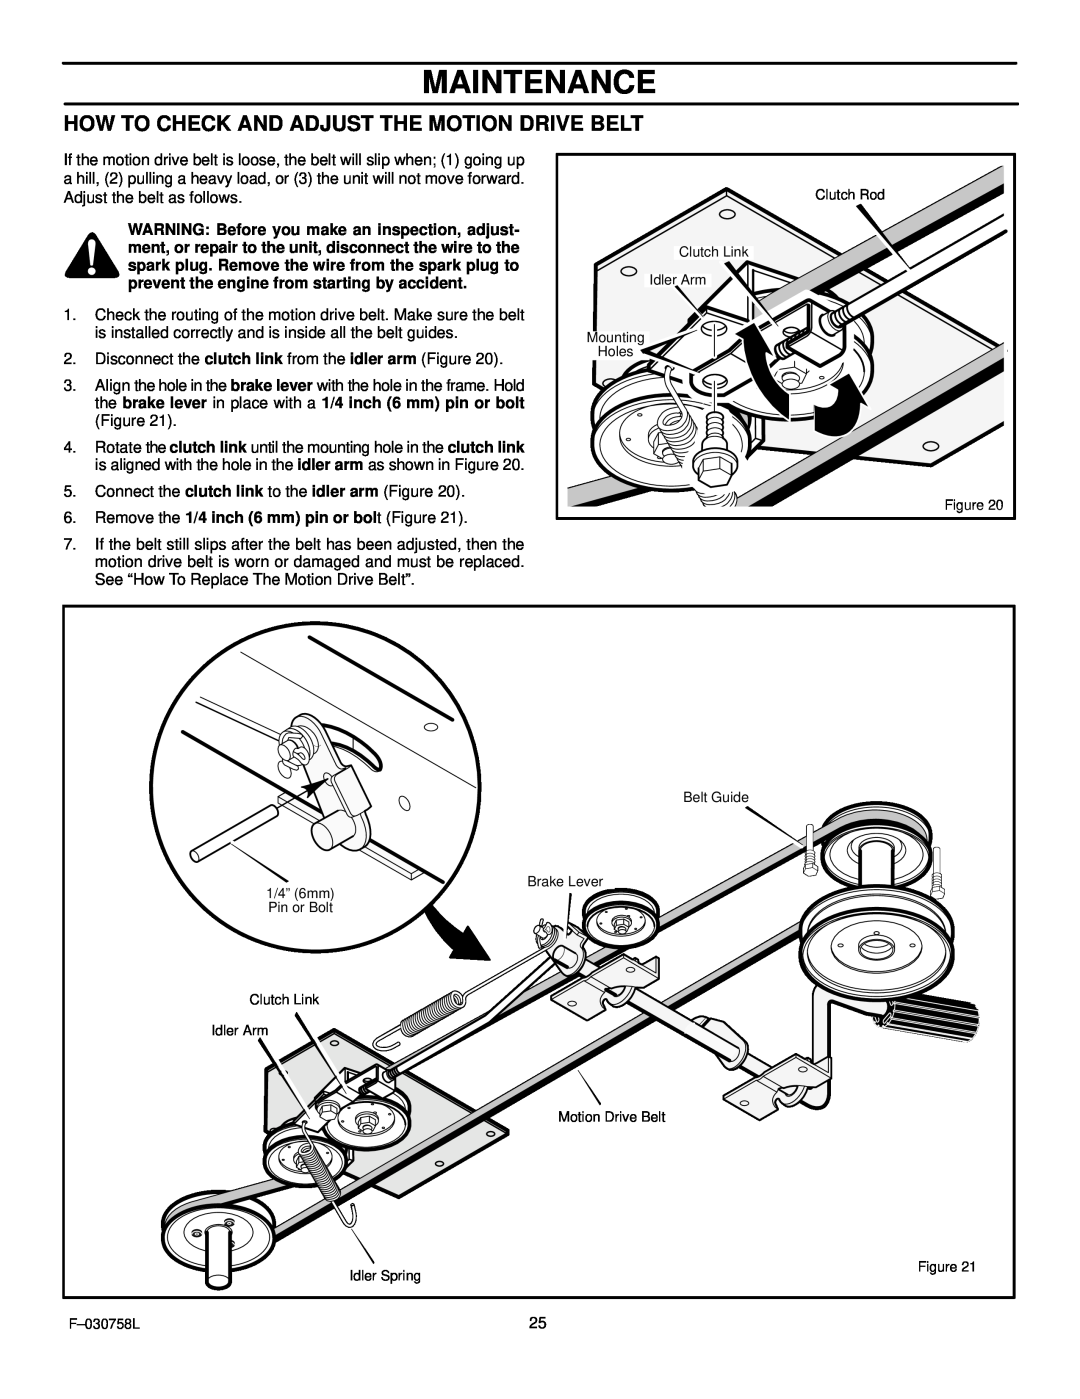 Murray 465609x24A manual Maintenance, How To Check And Adjust The Motion Drive Belt 